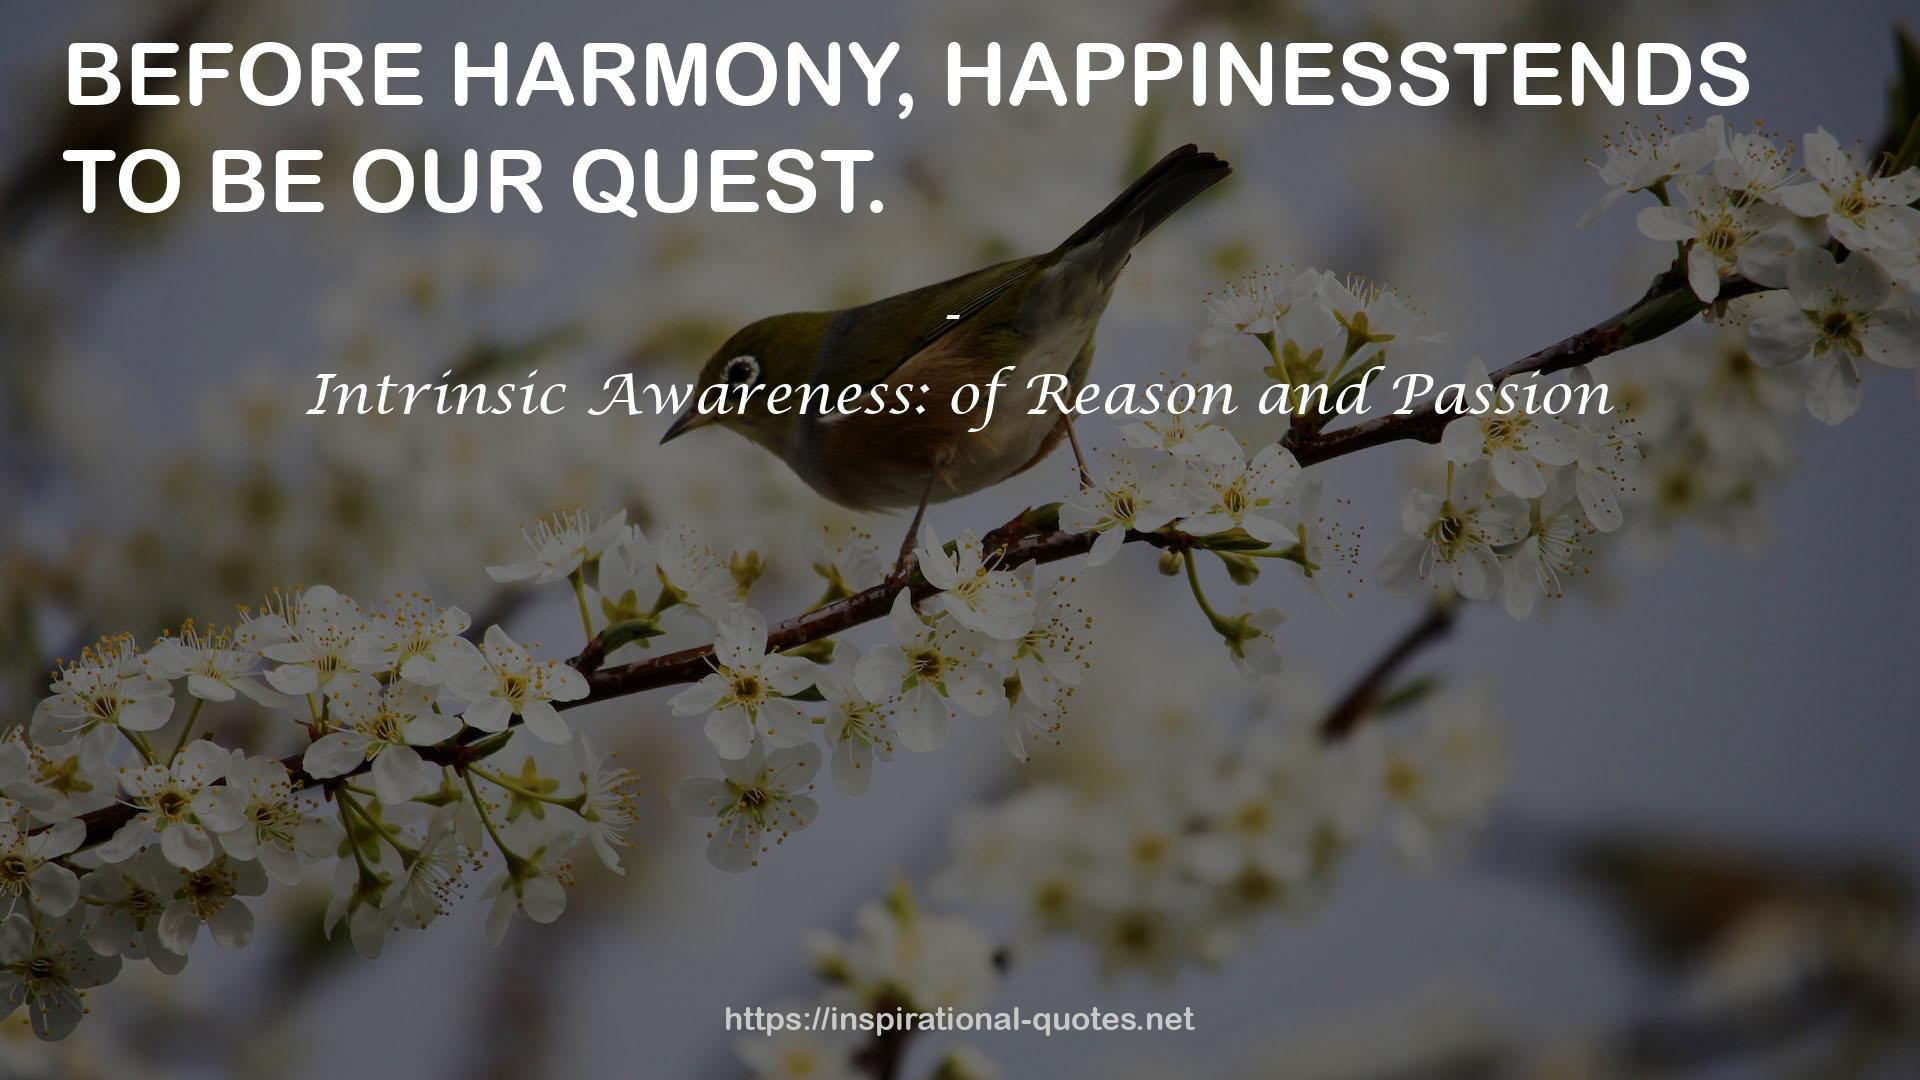 Intrinsic Awareness: of Reason and Passion QUOTES